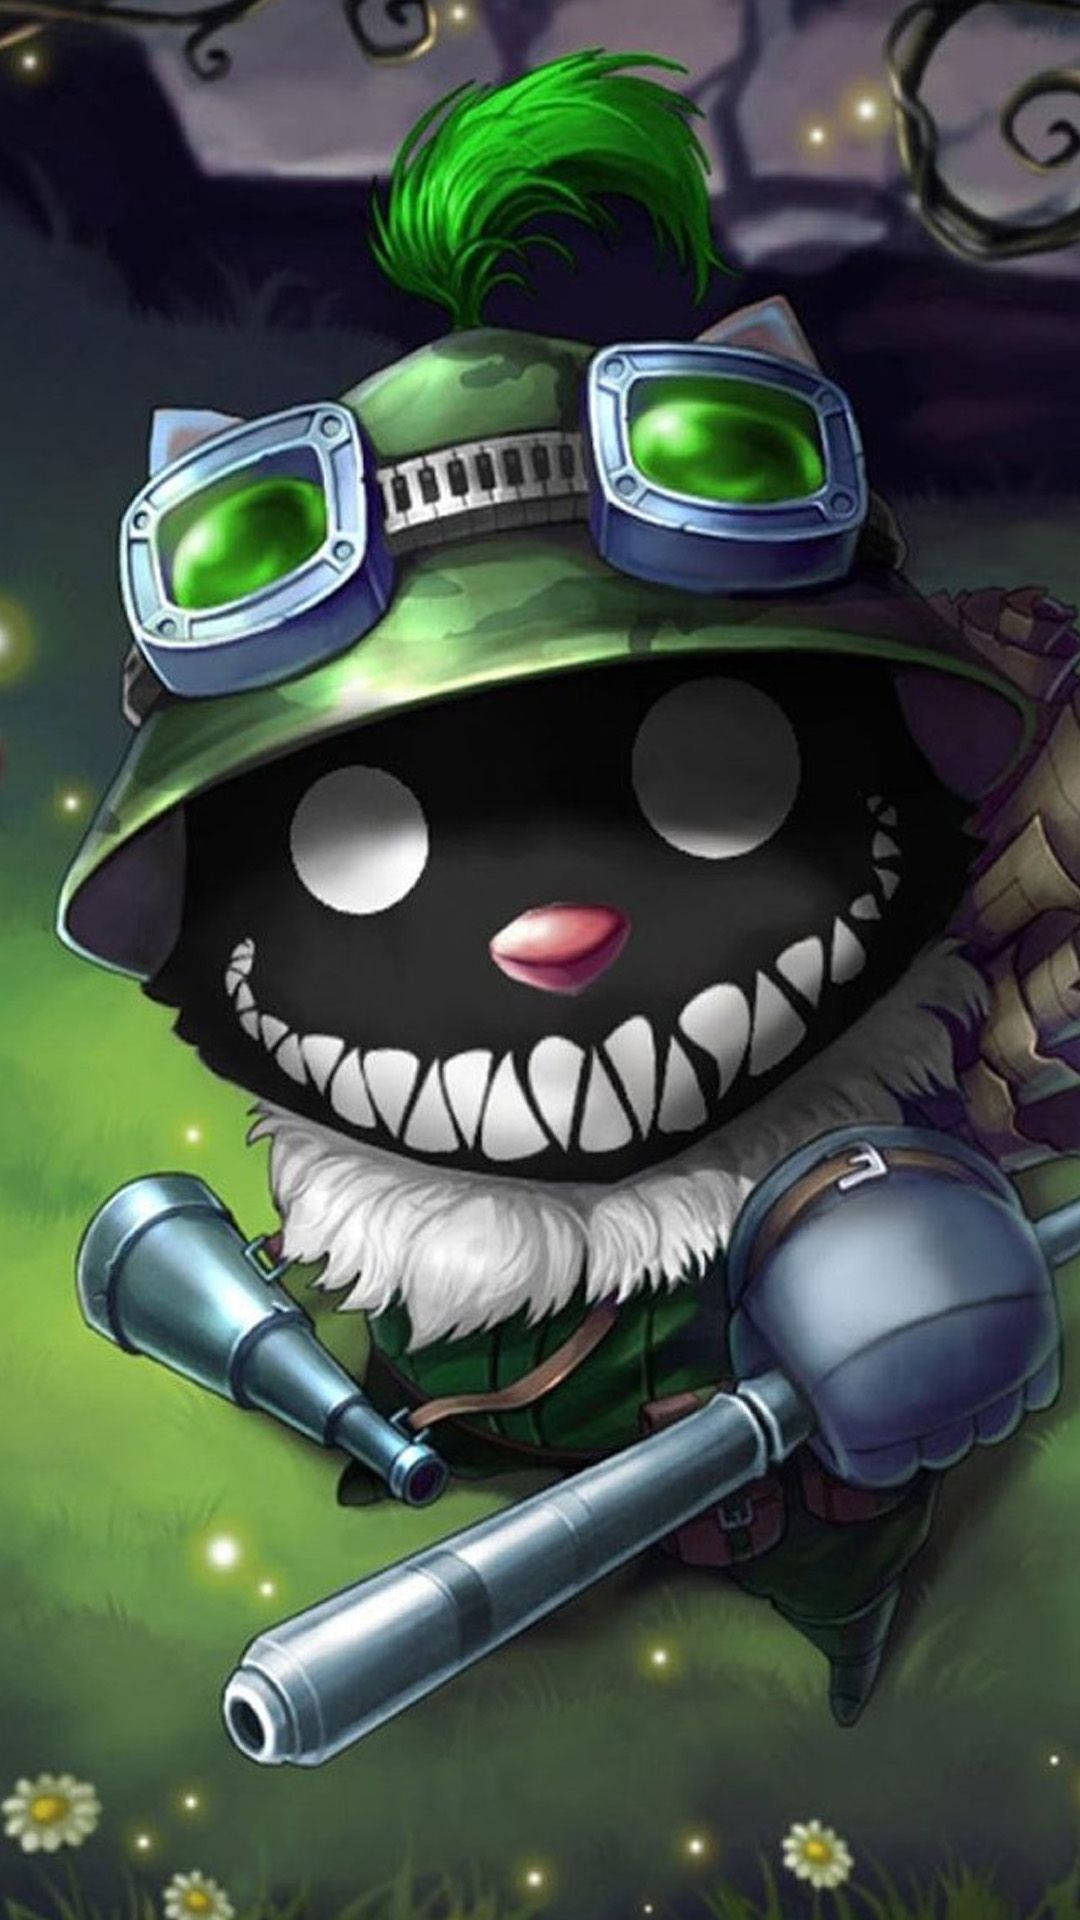 Iphone Gaming Teemo League Of Legends